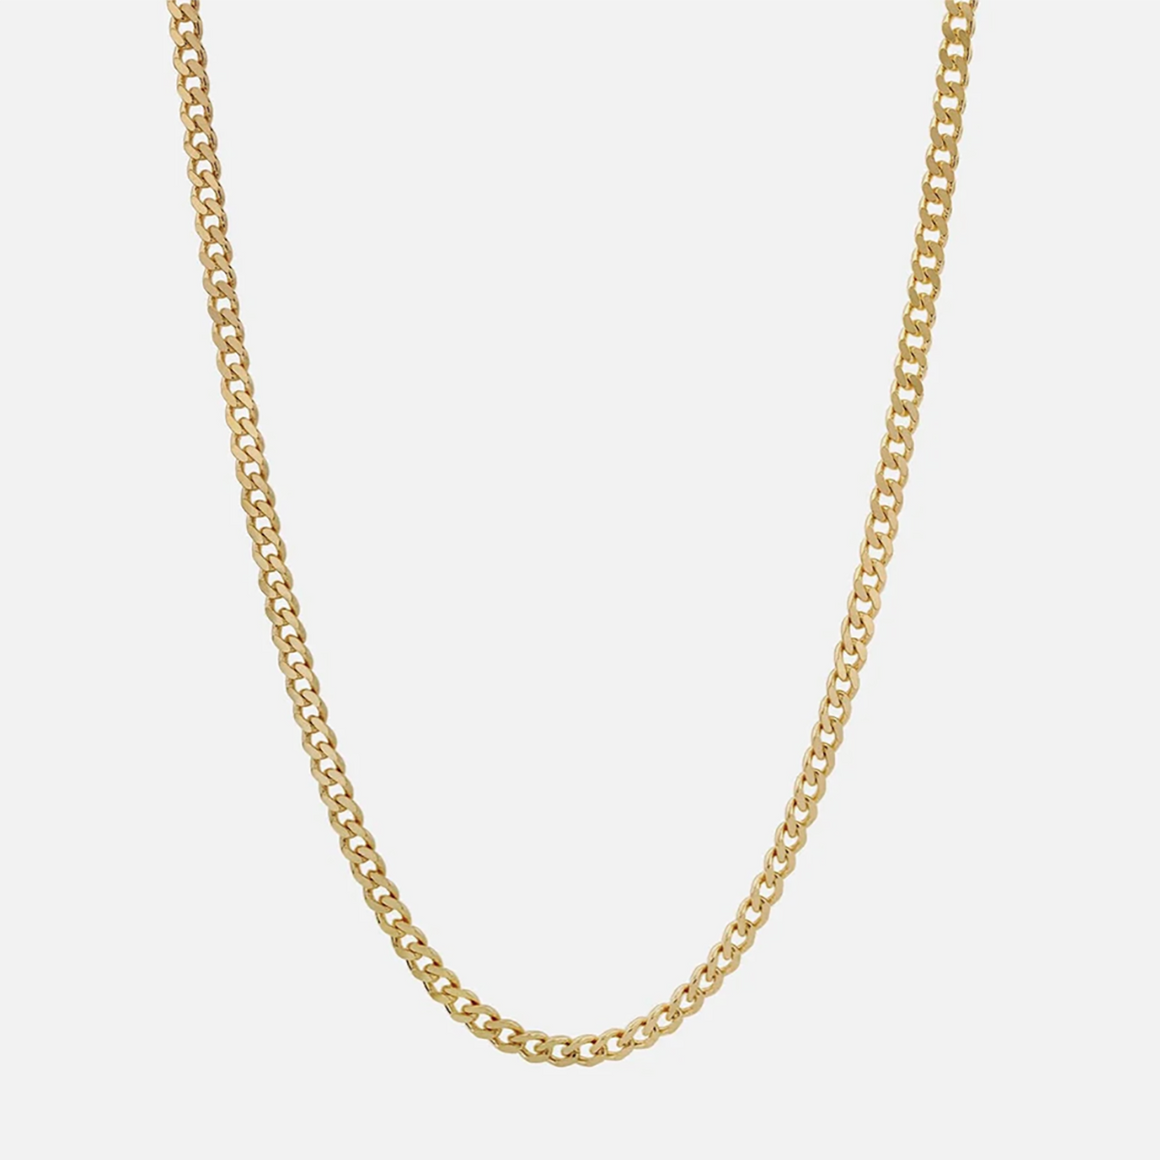 54 FLORAL 'CONNELL' 3mm CURB NECKLACE CHAIN - GOLD